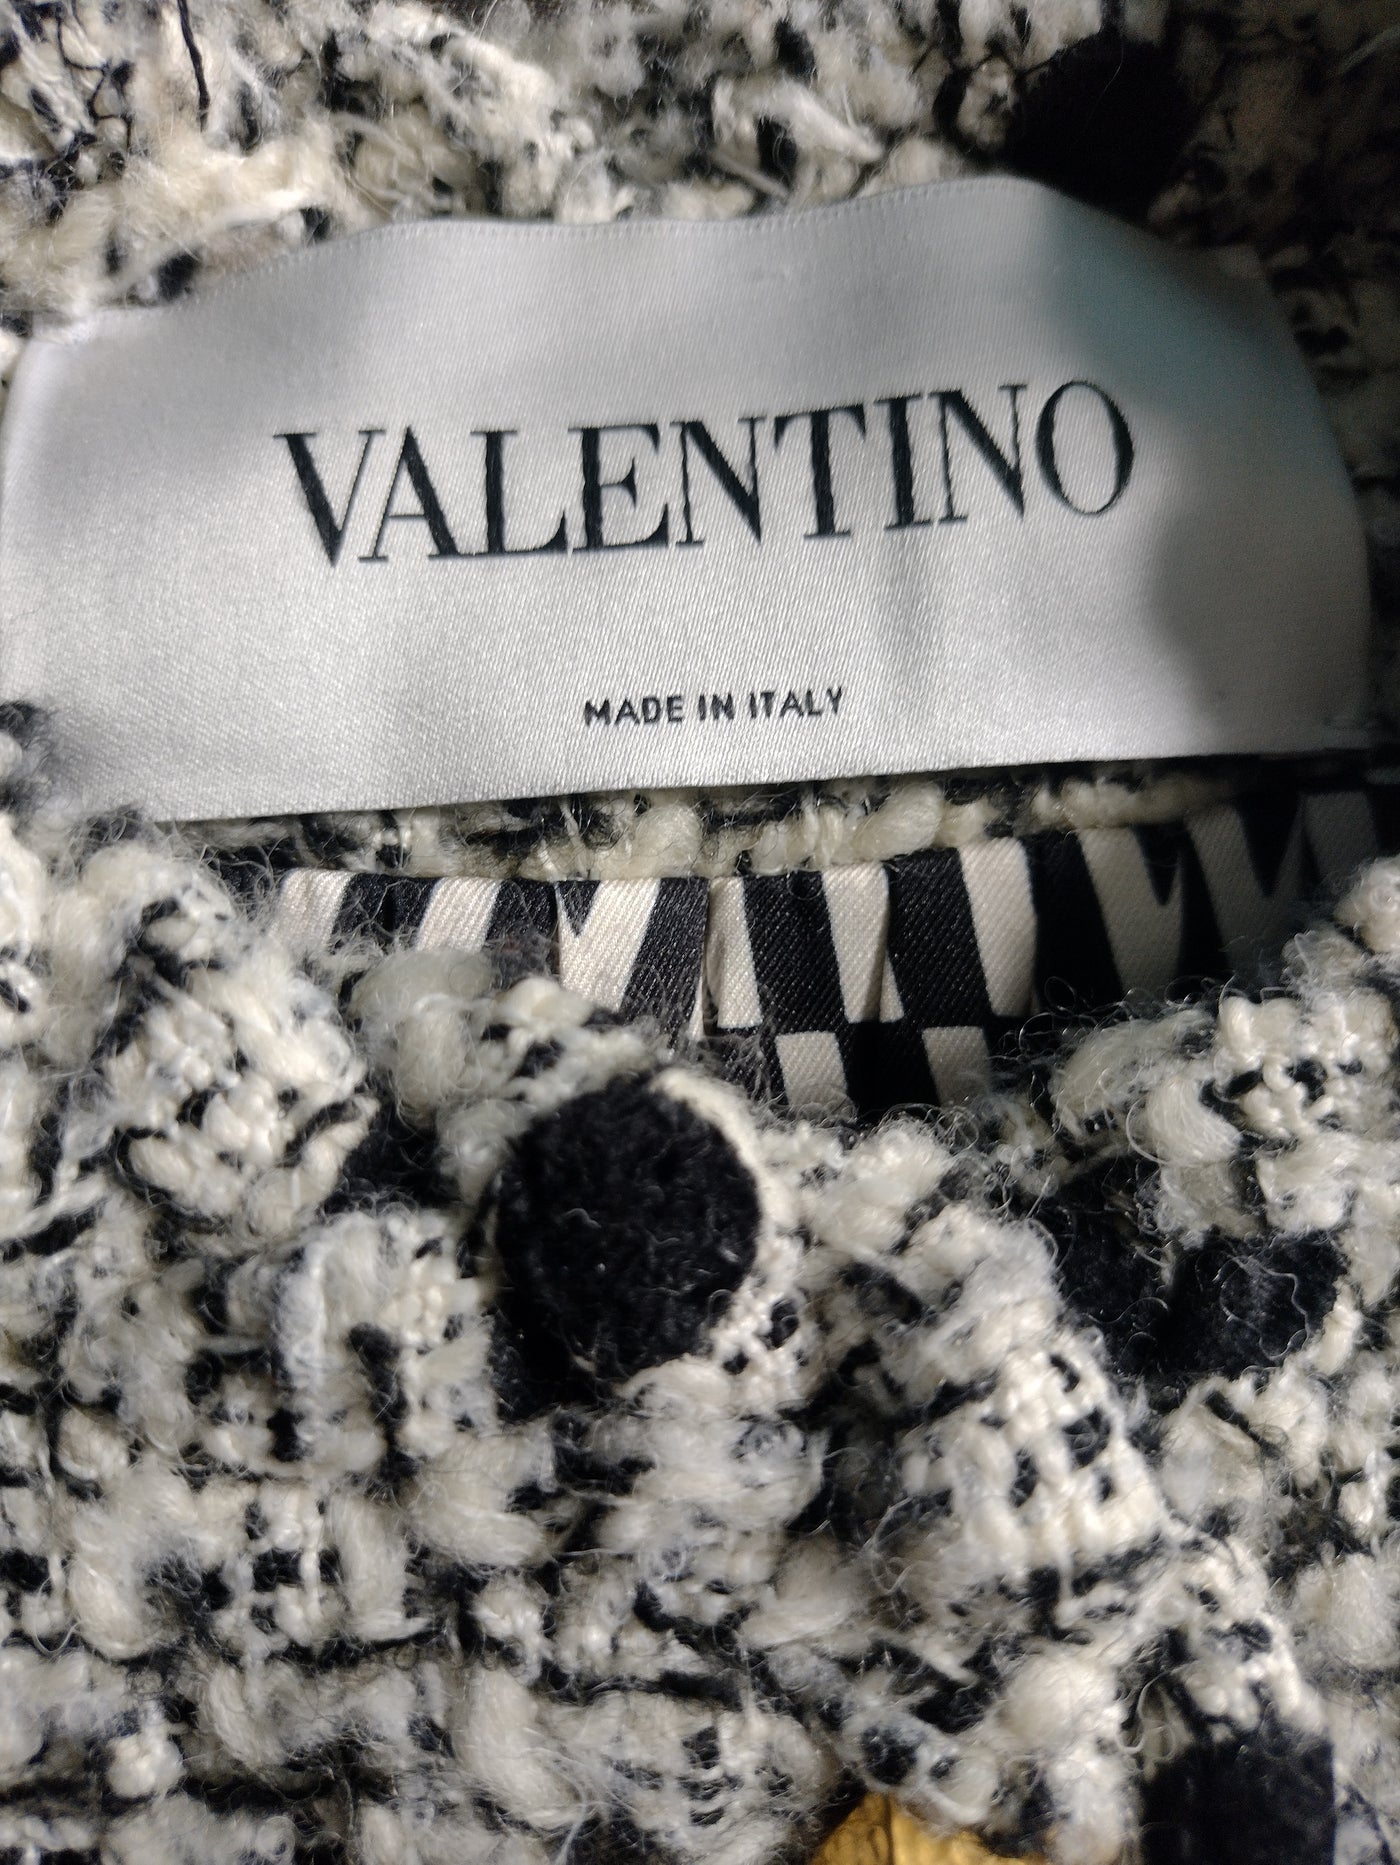 VALENTINO Spring Summer 2021 collection gold studs jacket size 38 RRP £2850